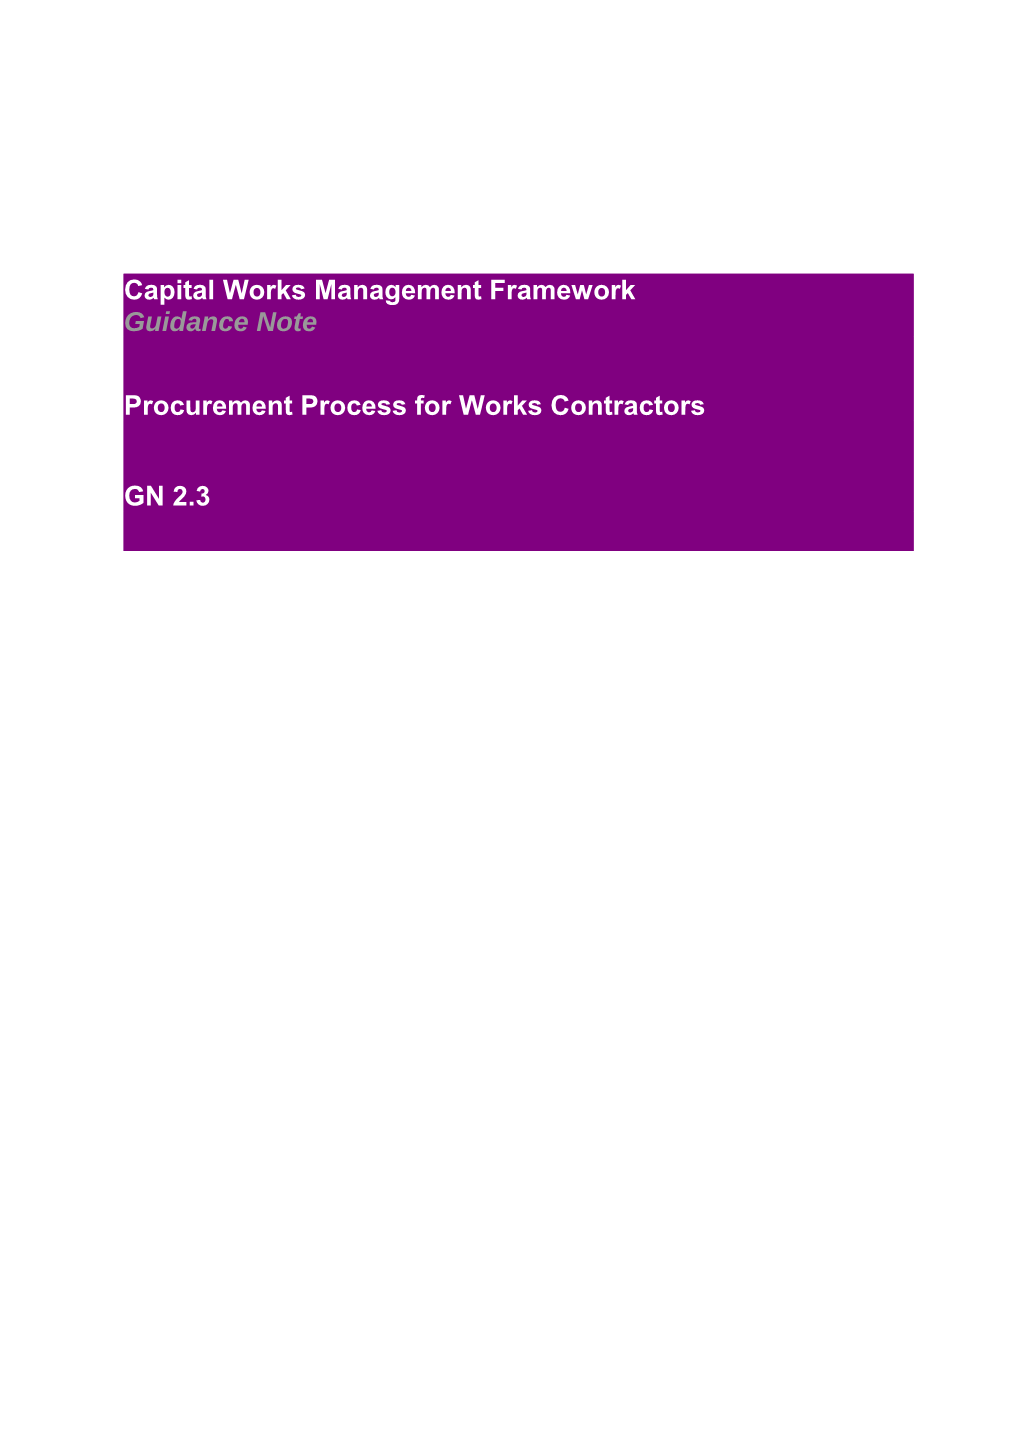 Procurement Process for Works Contractors Document Reference GN 2.3. V.1.1